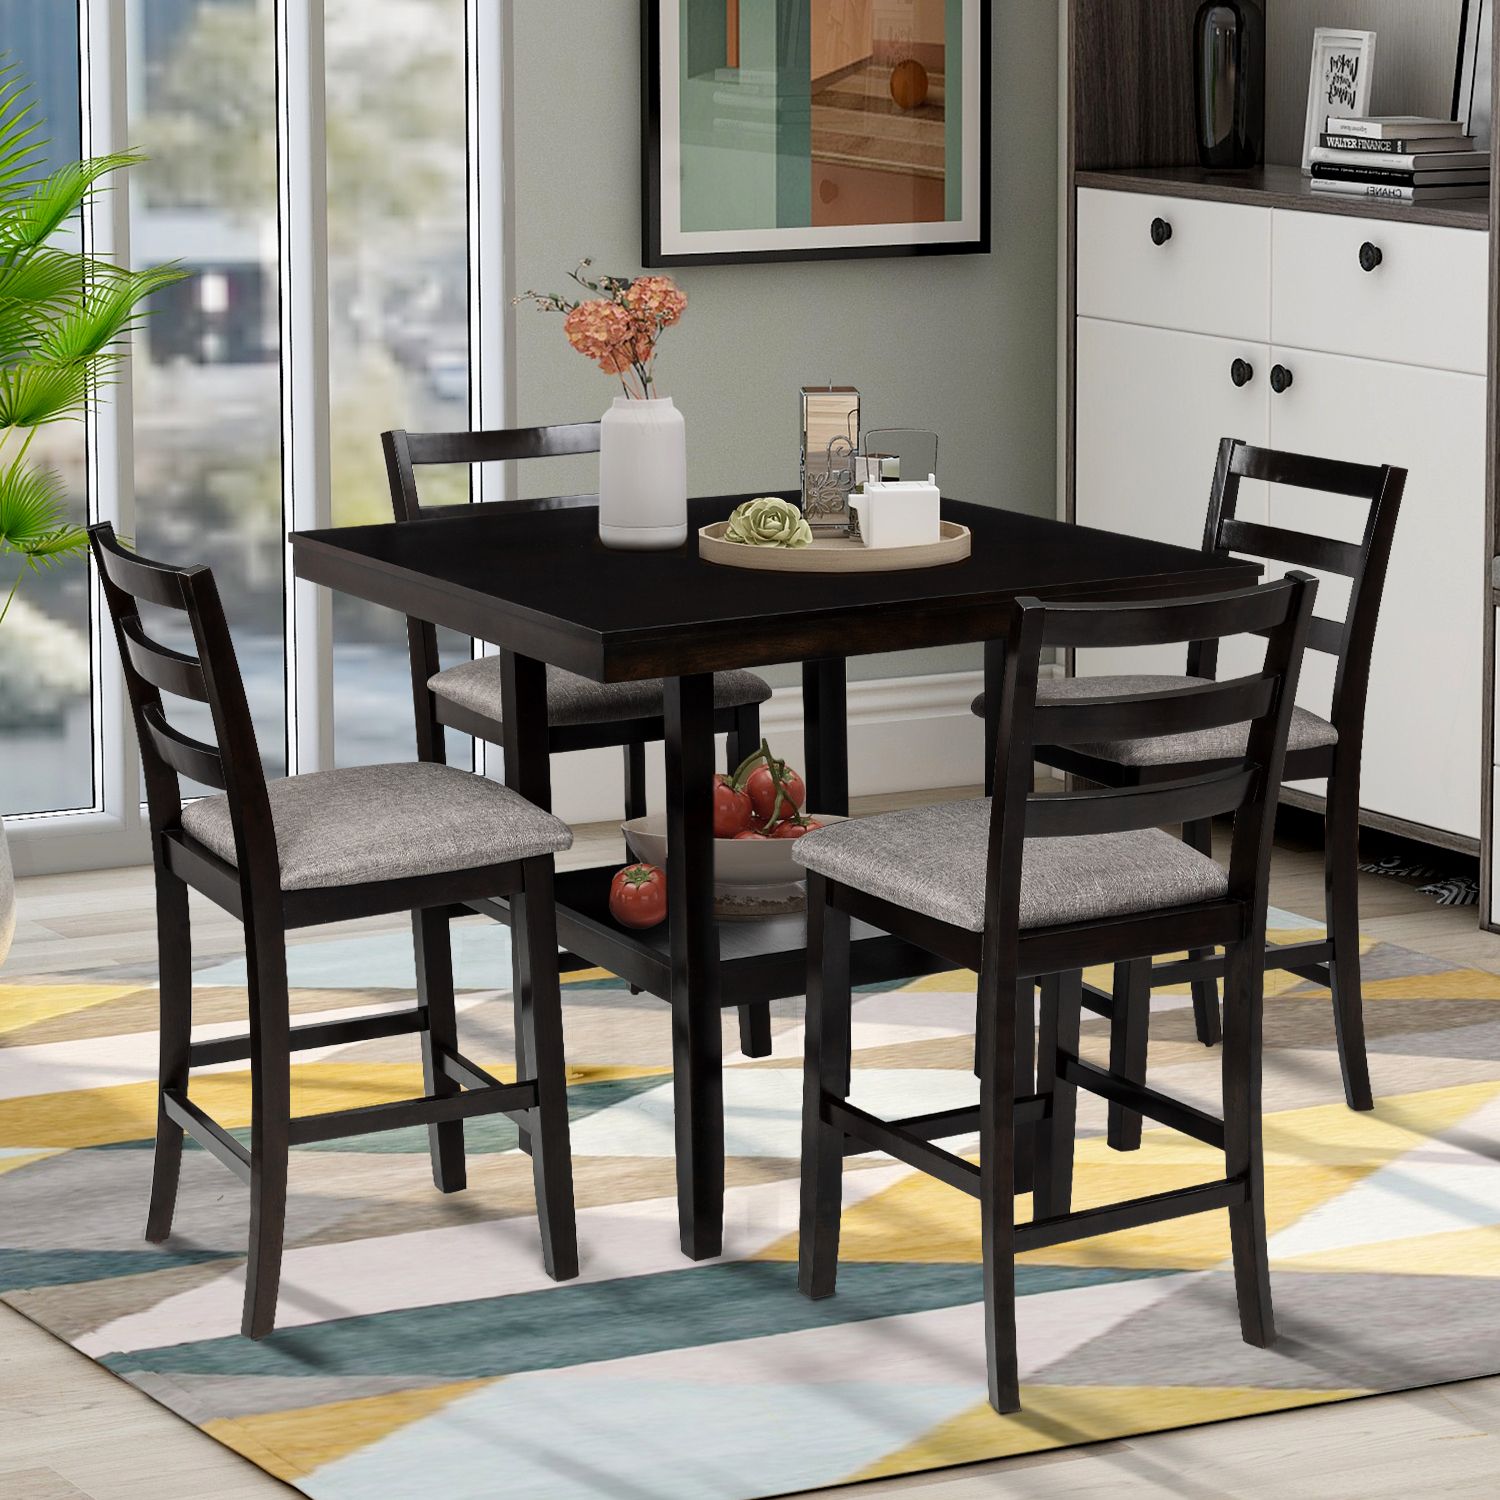 Euroco 5 Piece Counter Height Dining Set, Wooden Dining Set With Padded With Regard To Wood Bistro Table And Chairs Sets (View 9 of 15)